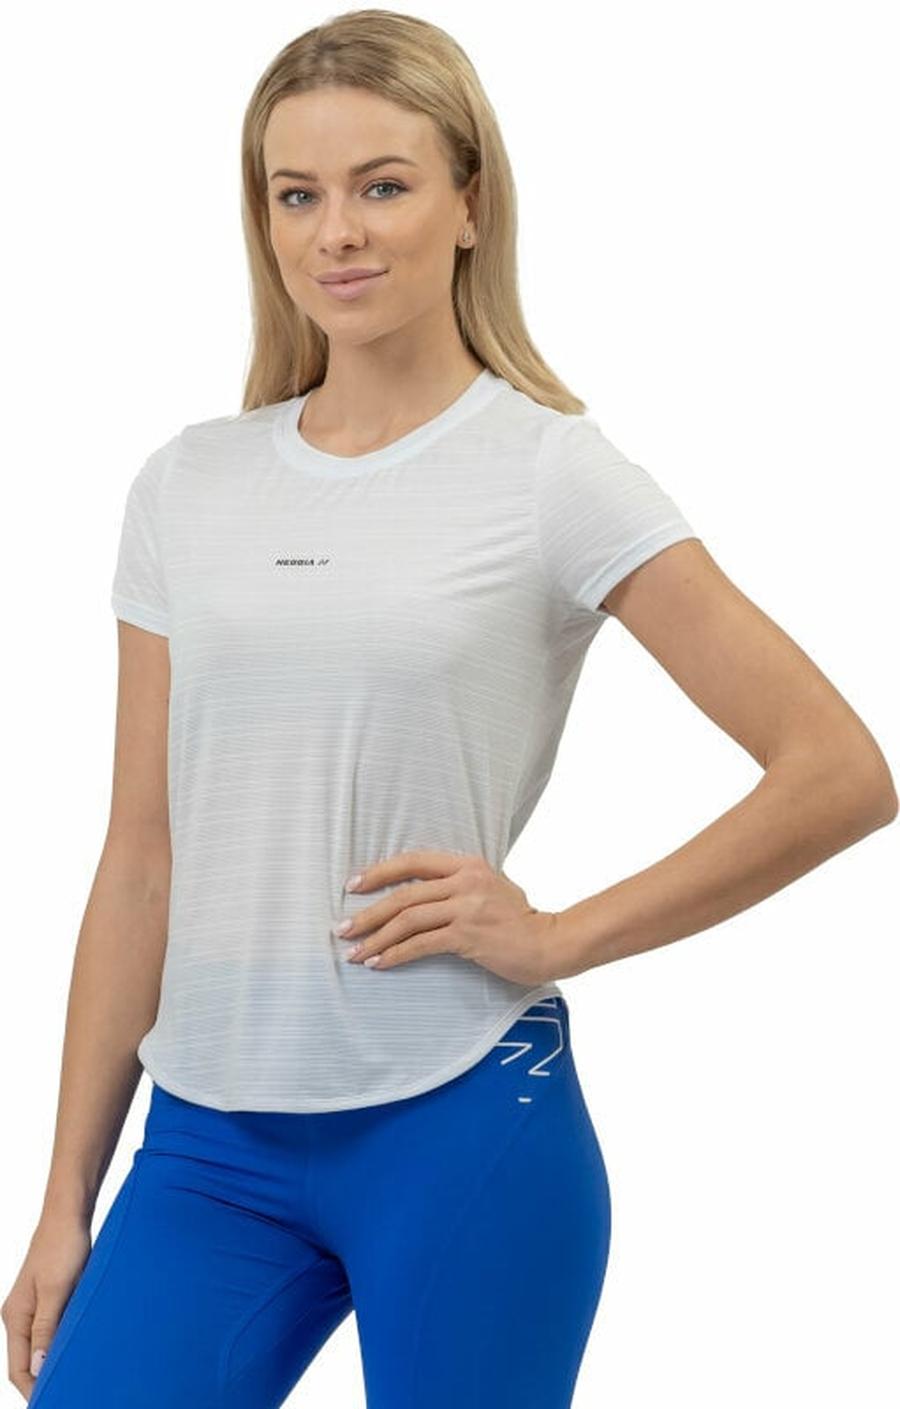 Nebbia FIT Activewear T-shirt “Airy” with Reflective Logo White S